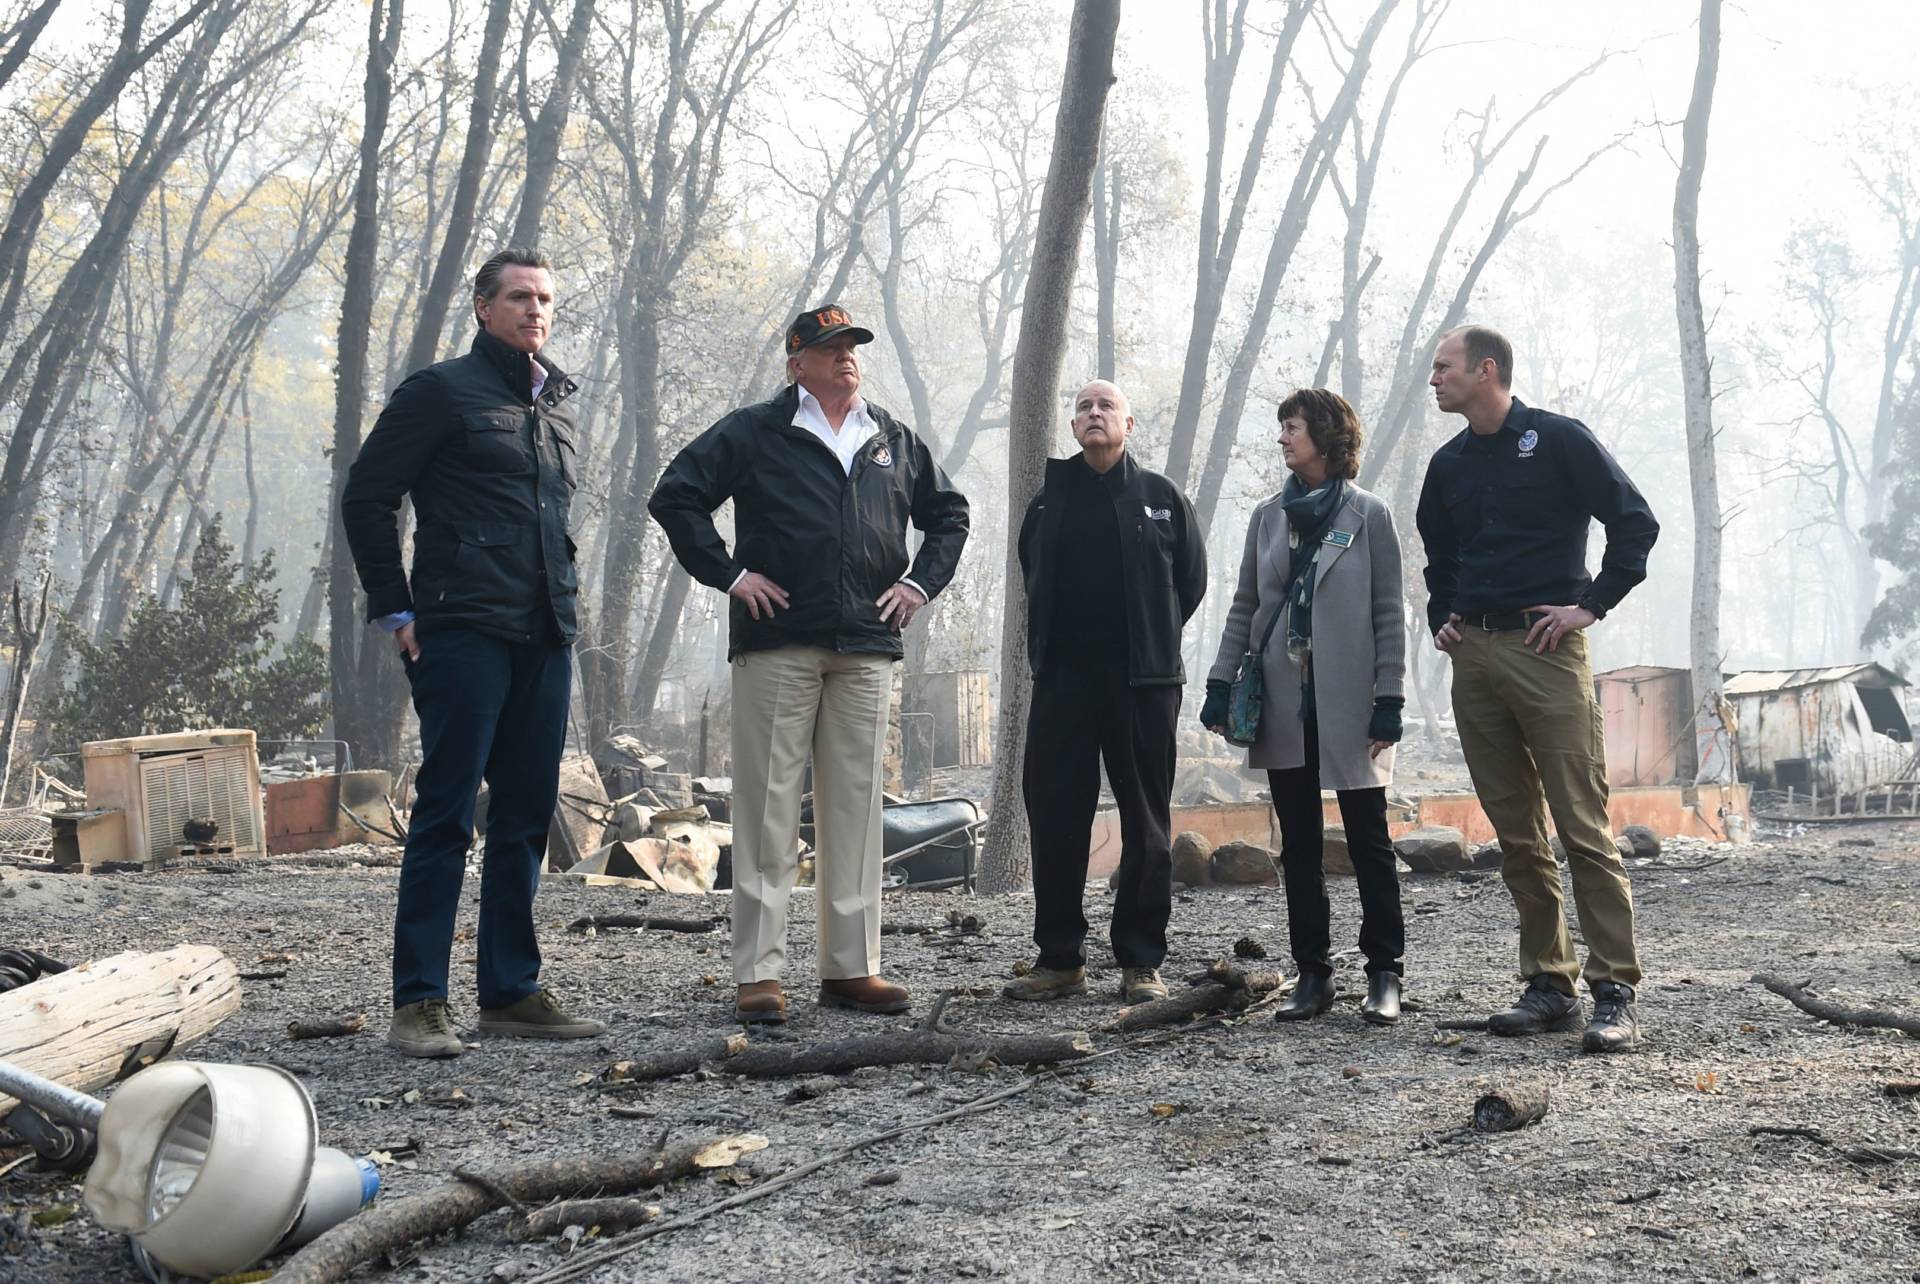 US President Donald Trump (2L) looks on with Paradise Mayor Jody Jones (2R), Governor of California Jerry Brown (C), Administrator of the Federal Emergency Management Agency, Brock Long (R), and Lieutenant Governor of California, Gavin Newson, as they view damage from wildfires in Paradise, California on November 17, 2018. - President Donald Trump arrived in California to meet with officials, victims and the 'unbelievably brave' firefighters there, as more than 1,000 people remain listed as missing in the worst-ever wildfire to hit the US state. SAUL LOEB/AFP/Getty Images